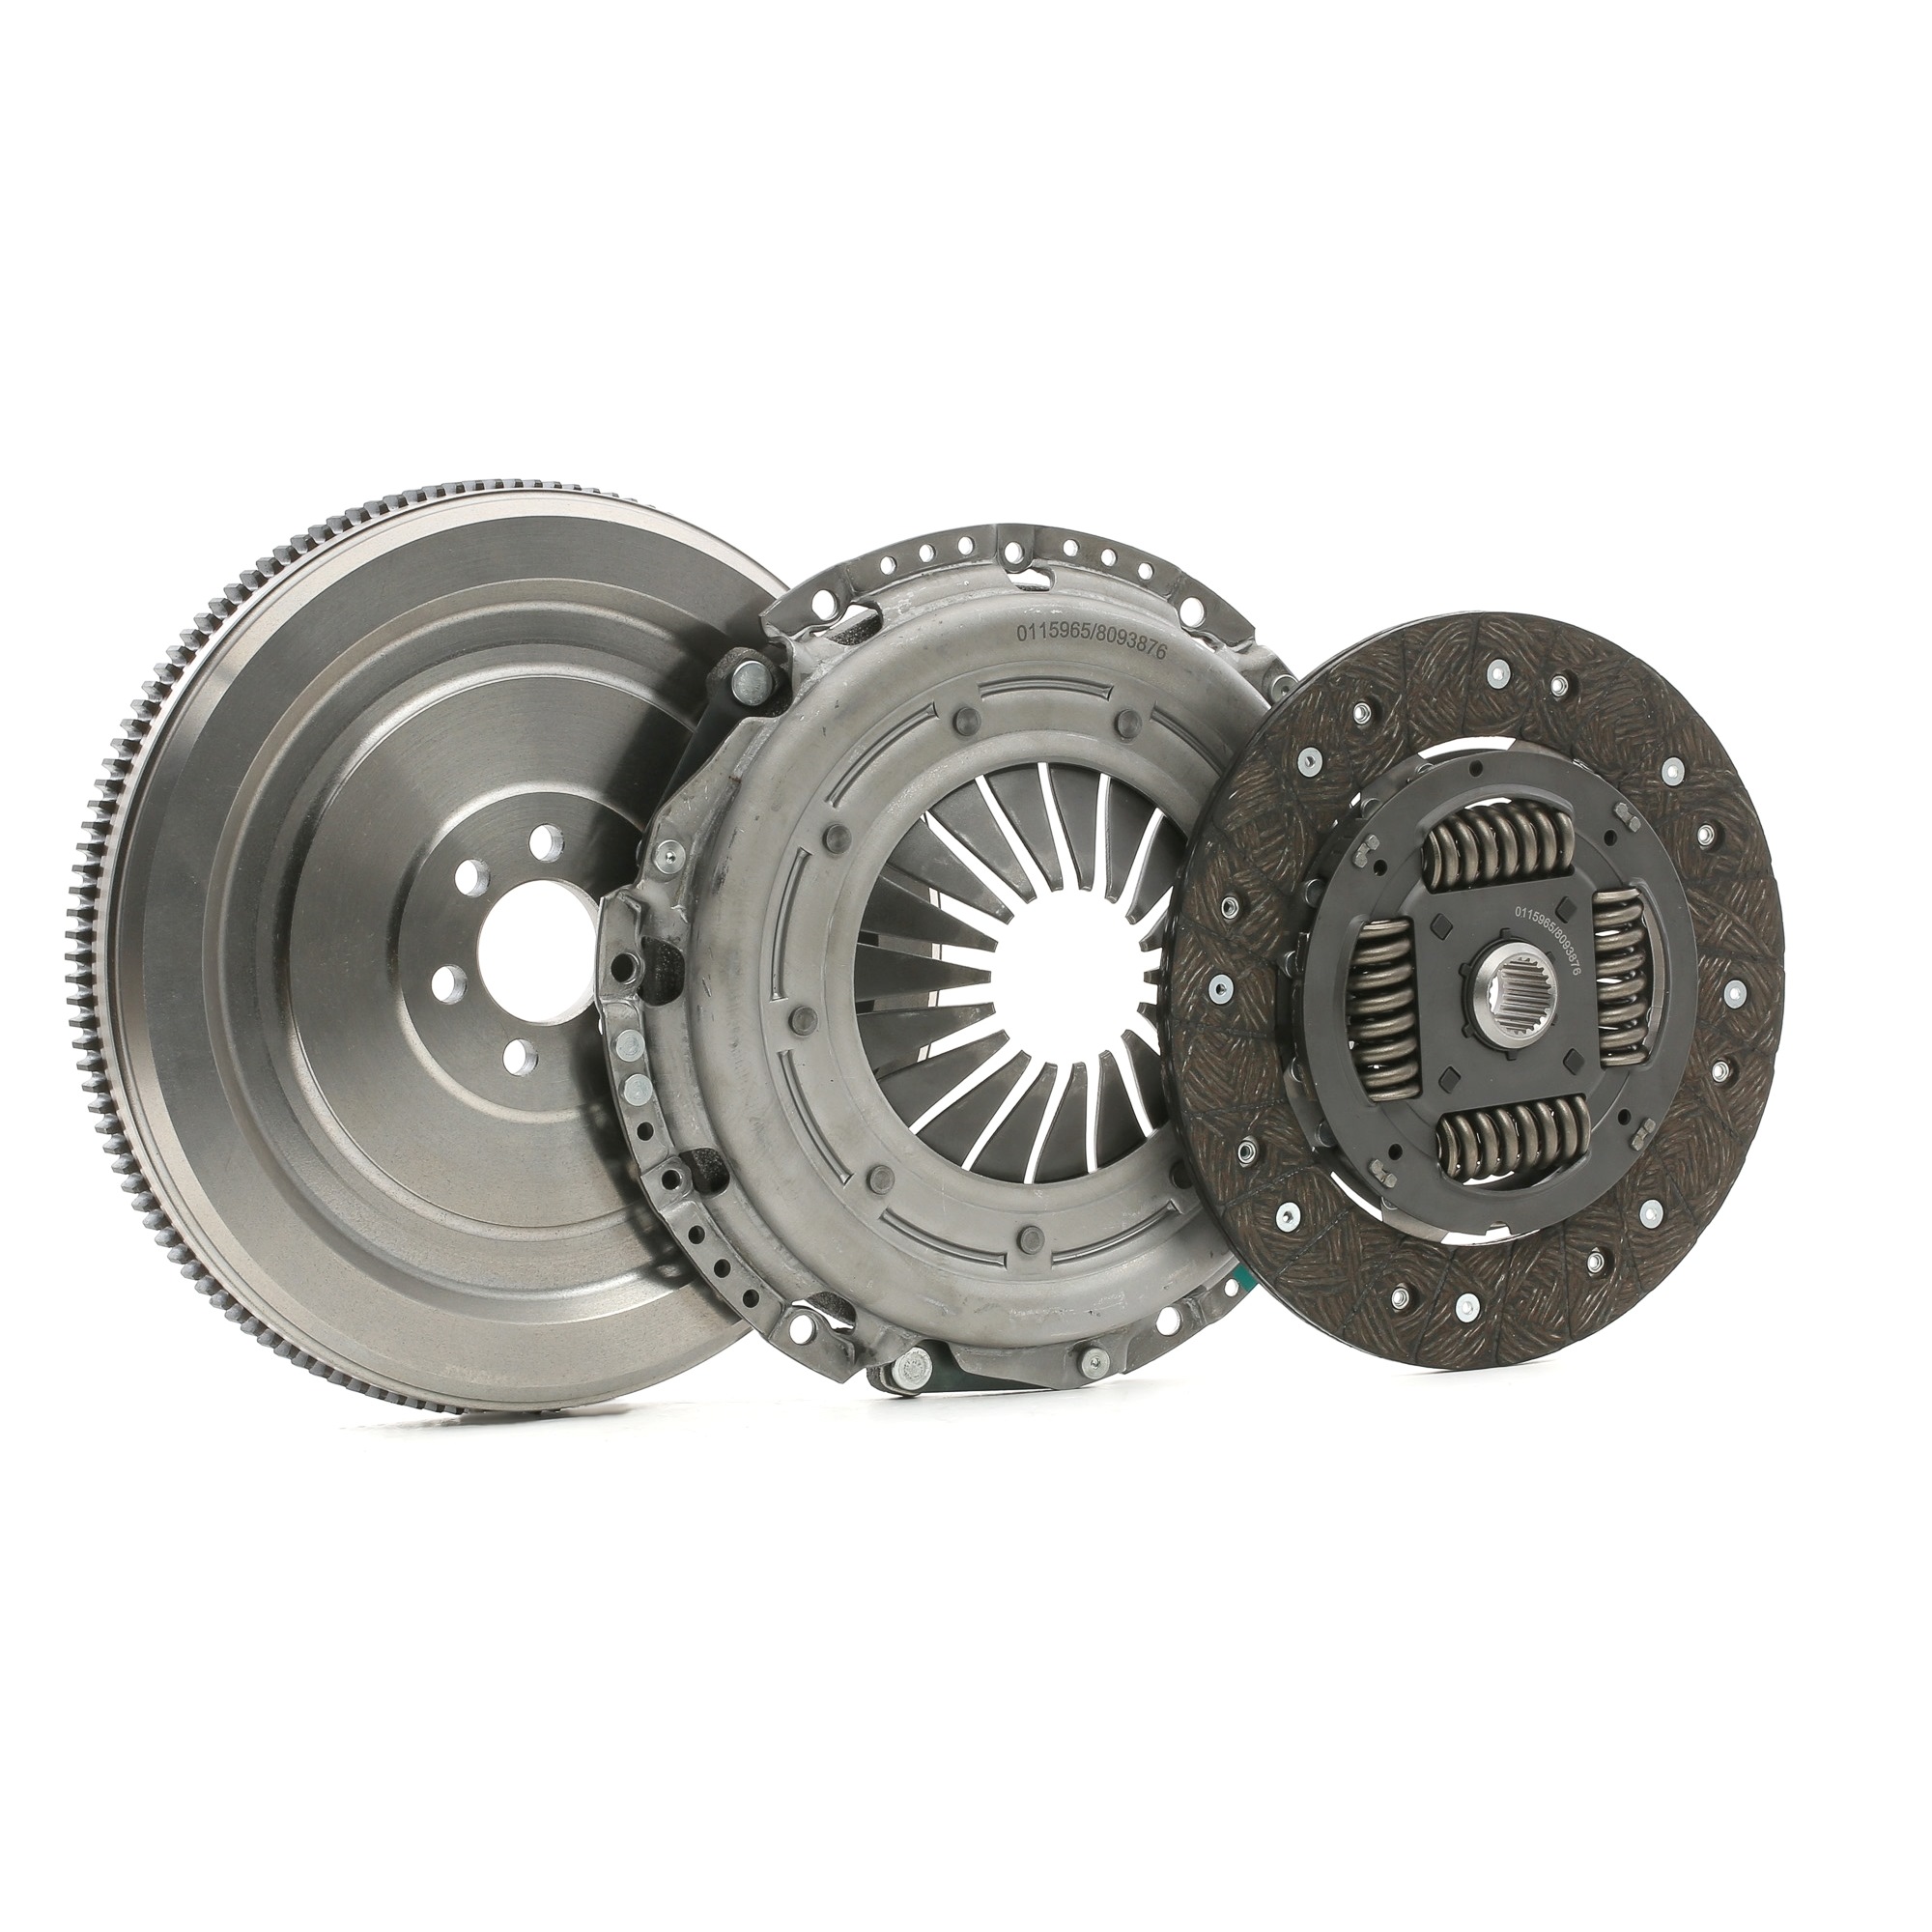 STARK SKCK-0100107 Clutch kit with clutch pressure plate, without central slave cylinder, with flywheel, with screw set, with clutch disc, 240mm